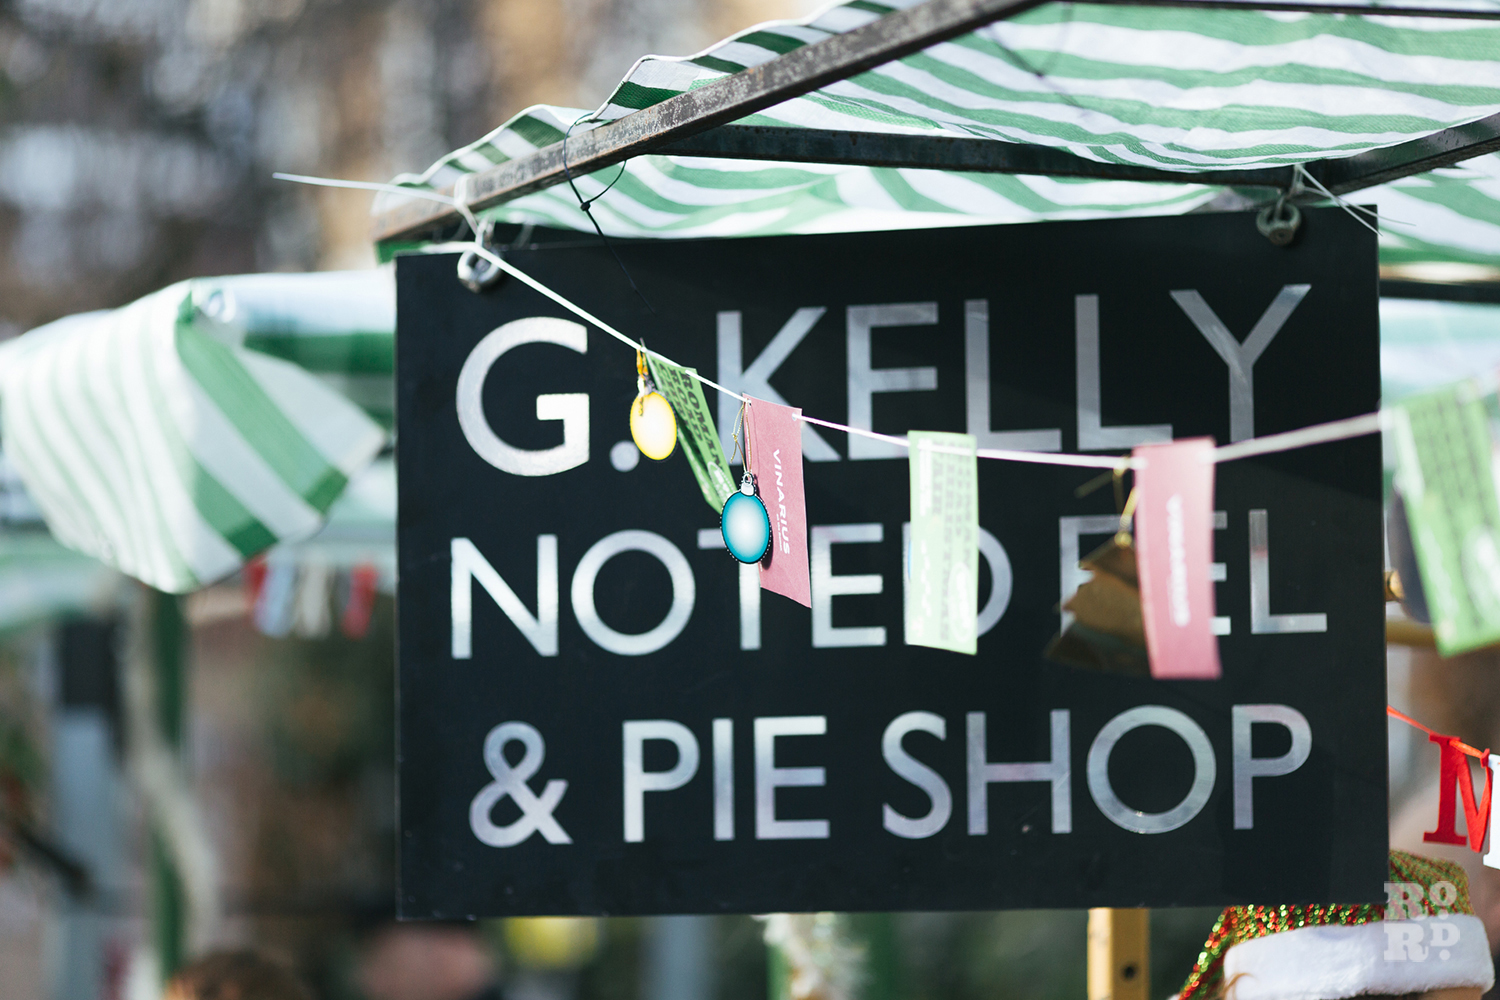 GKelly Noted Eel and Pie Shop sign at Roman Road Christmas Fair 2016 © Roman Koblov